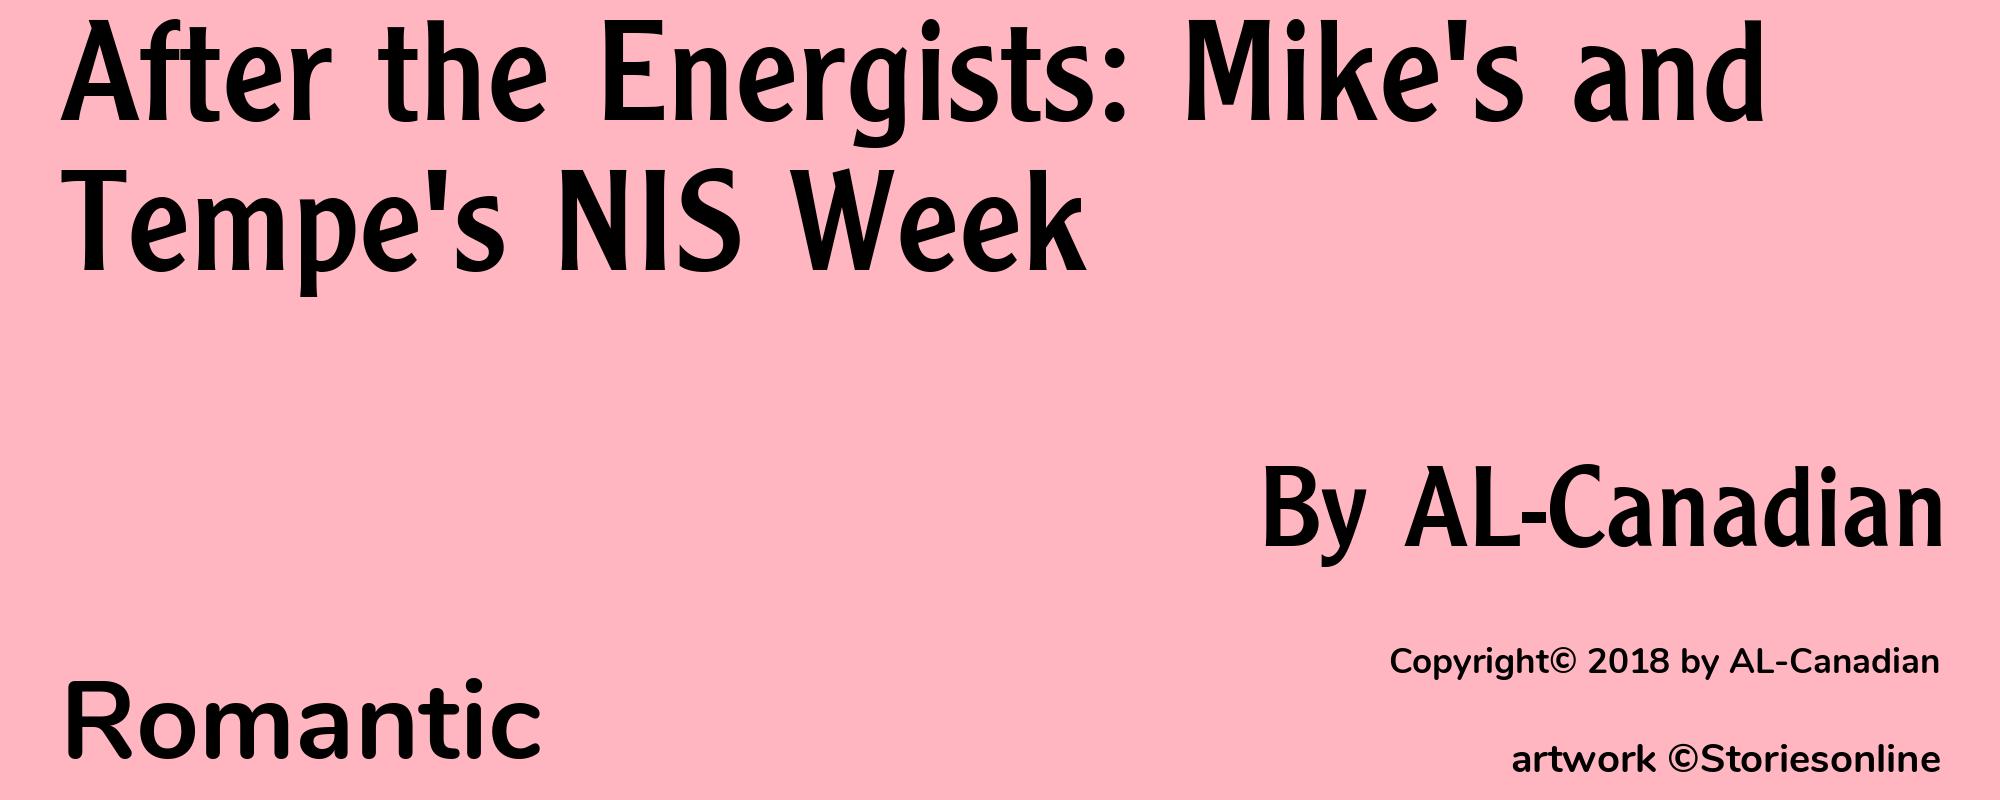 After the Energists: Mike's and Tempe's NIS Week - Cover